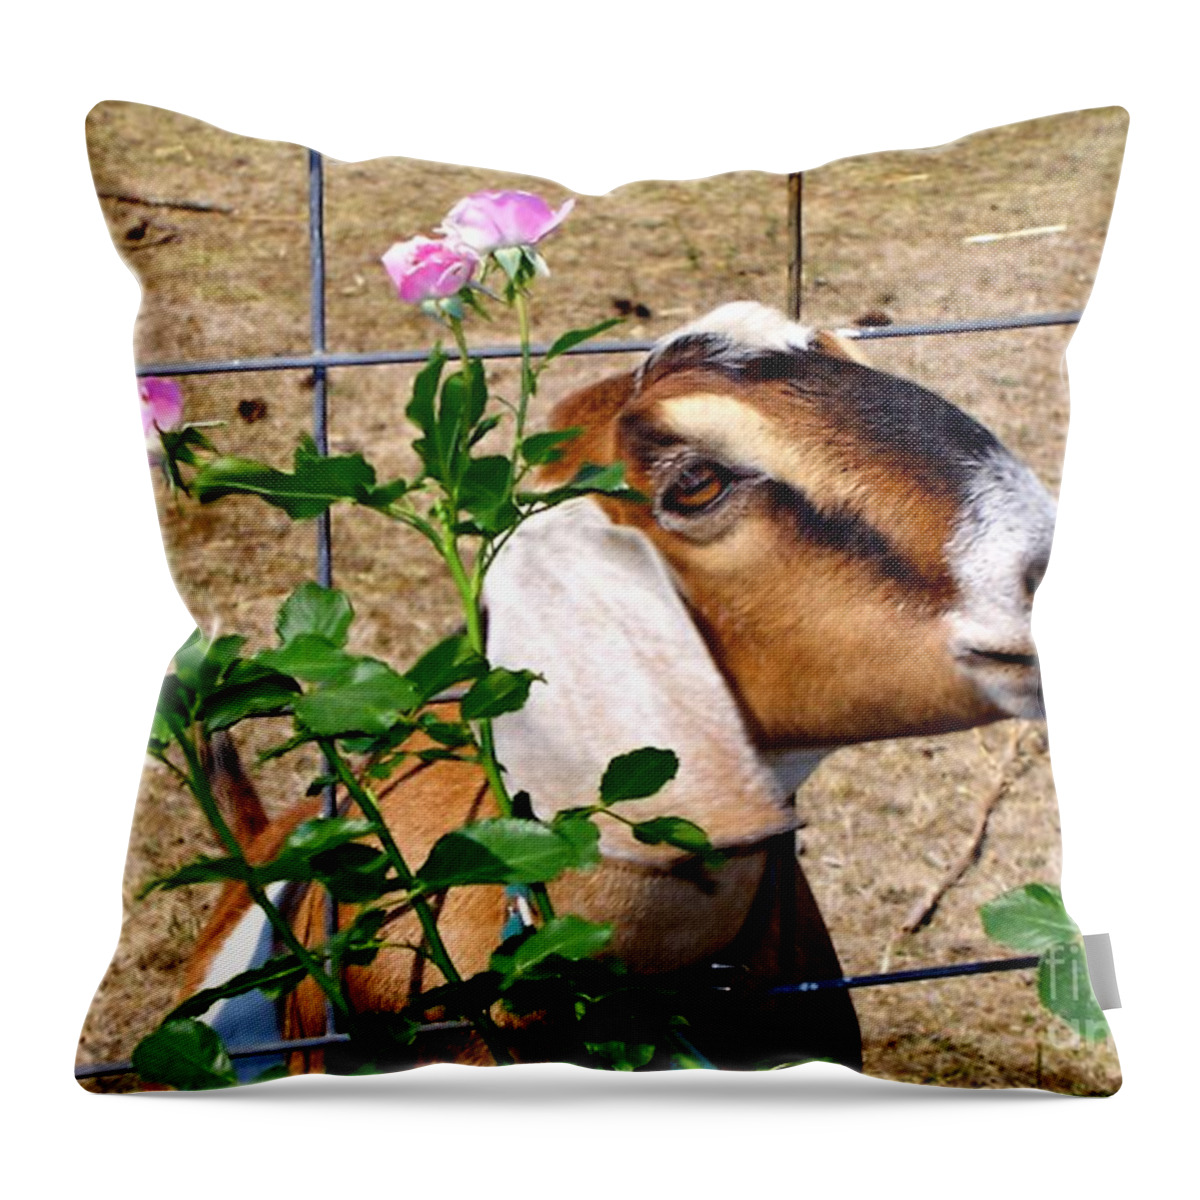 Animals Throw Pillow featuring the photograph Ah I Do Love A Rose by Julia Hassett